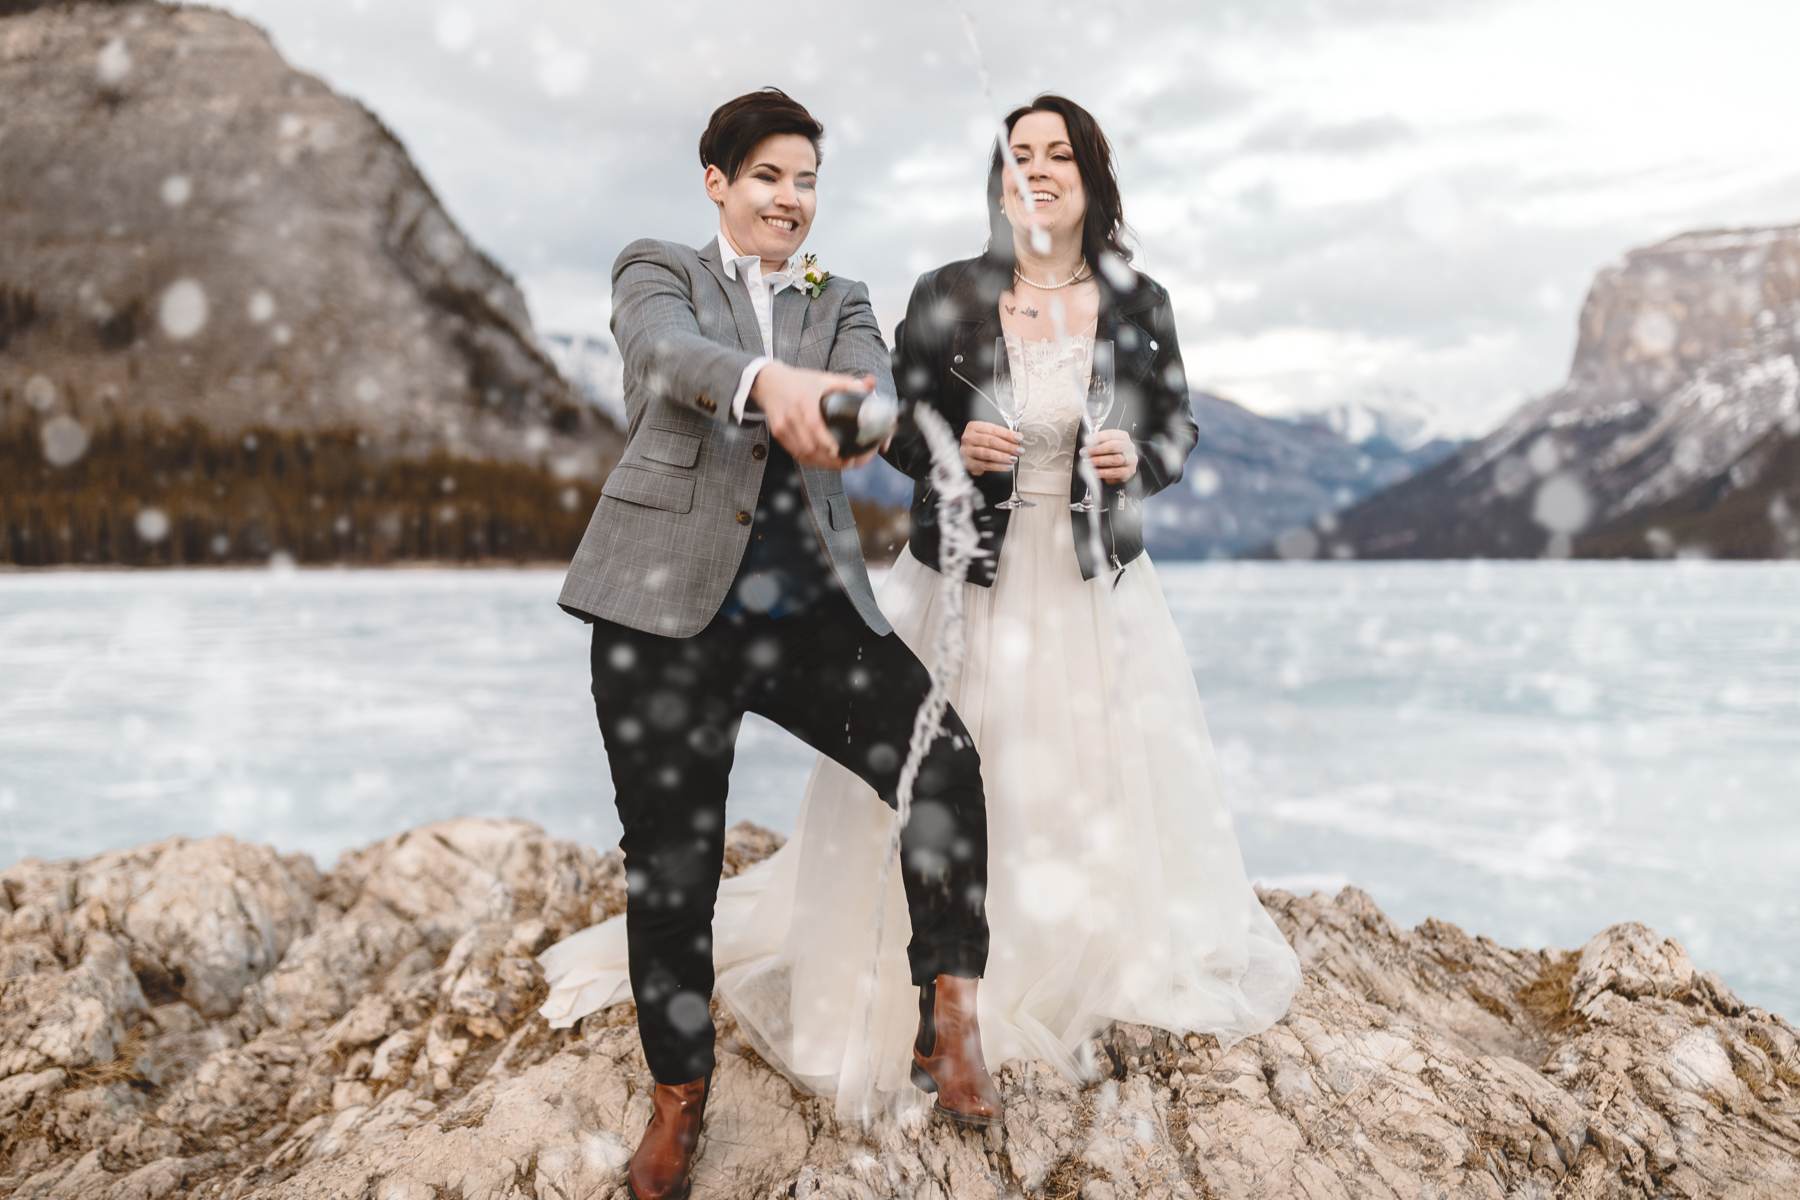 Banff National Park Elopement Photography with LGBTQ-friendly photographers - Image 34